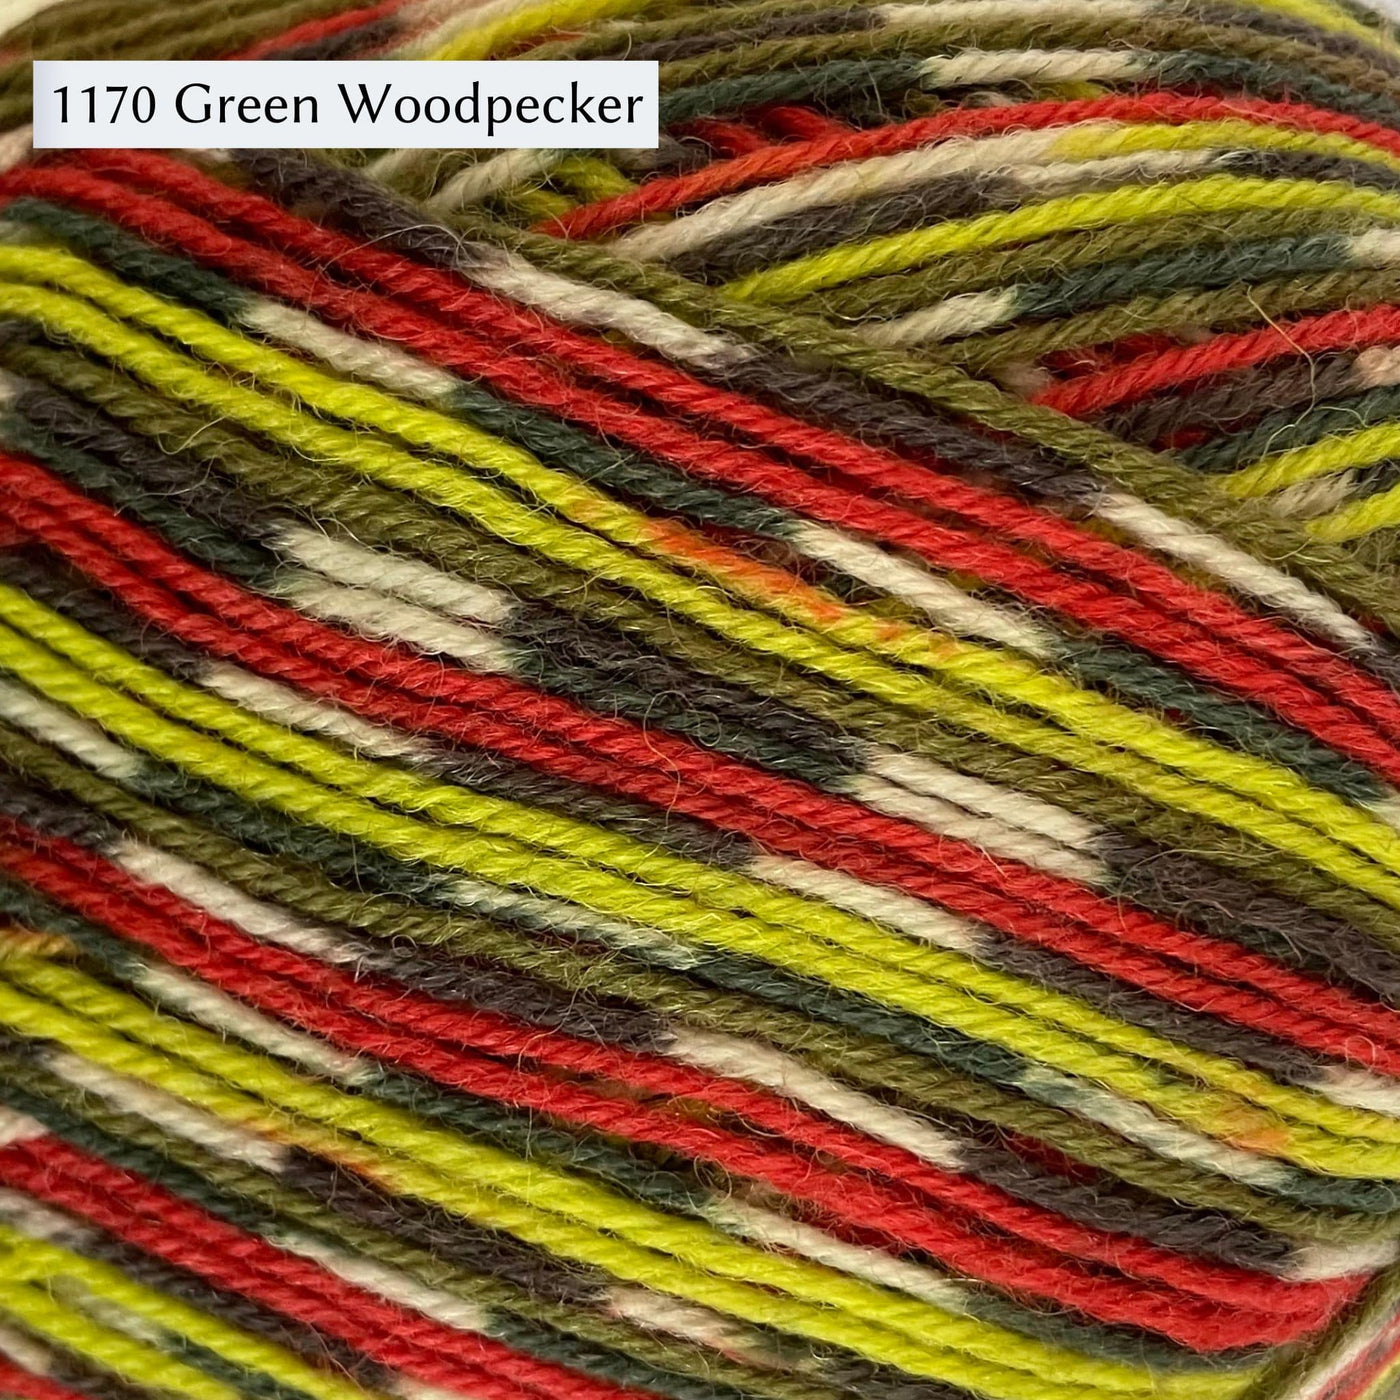 West Yorkshire Spinners (WYS) Signature 4 ply Yarn - Multicolored